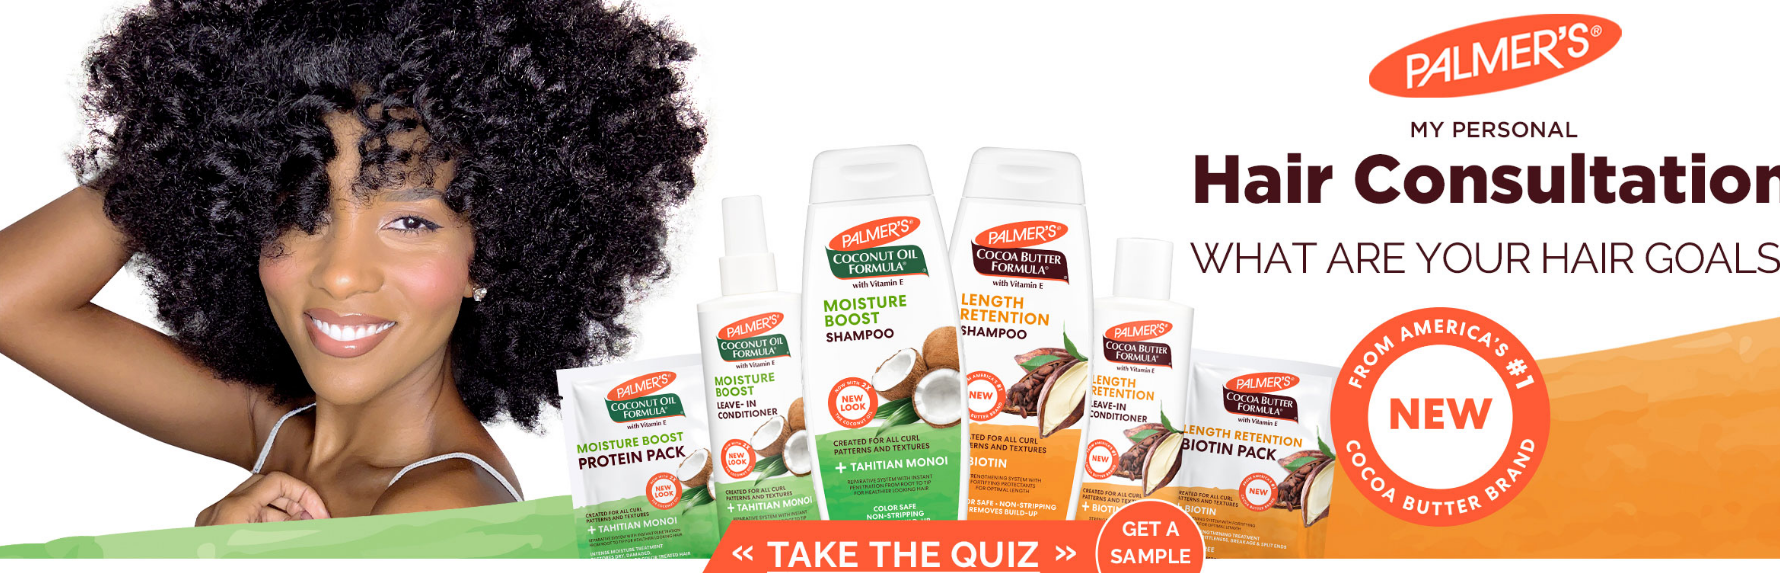 FREE Palmers Hair Care Sample! FREE Shipping!